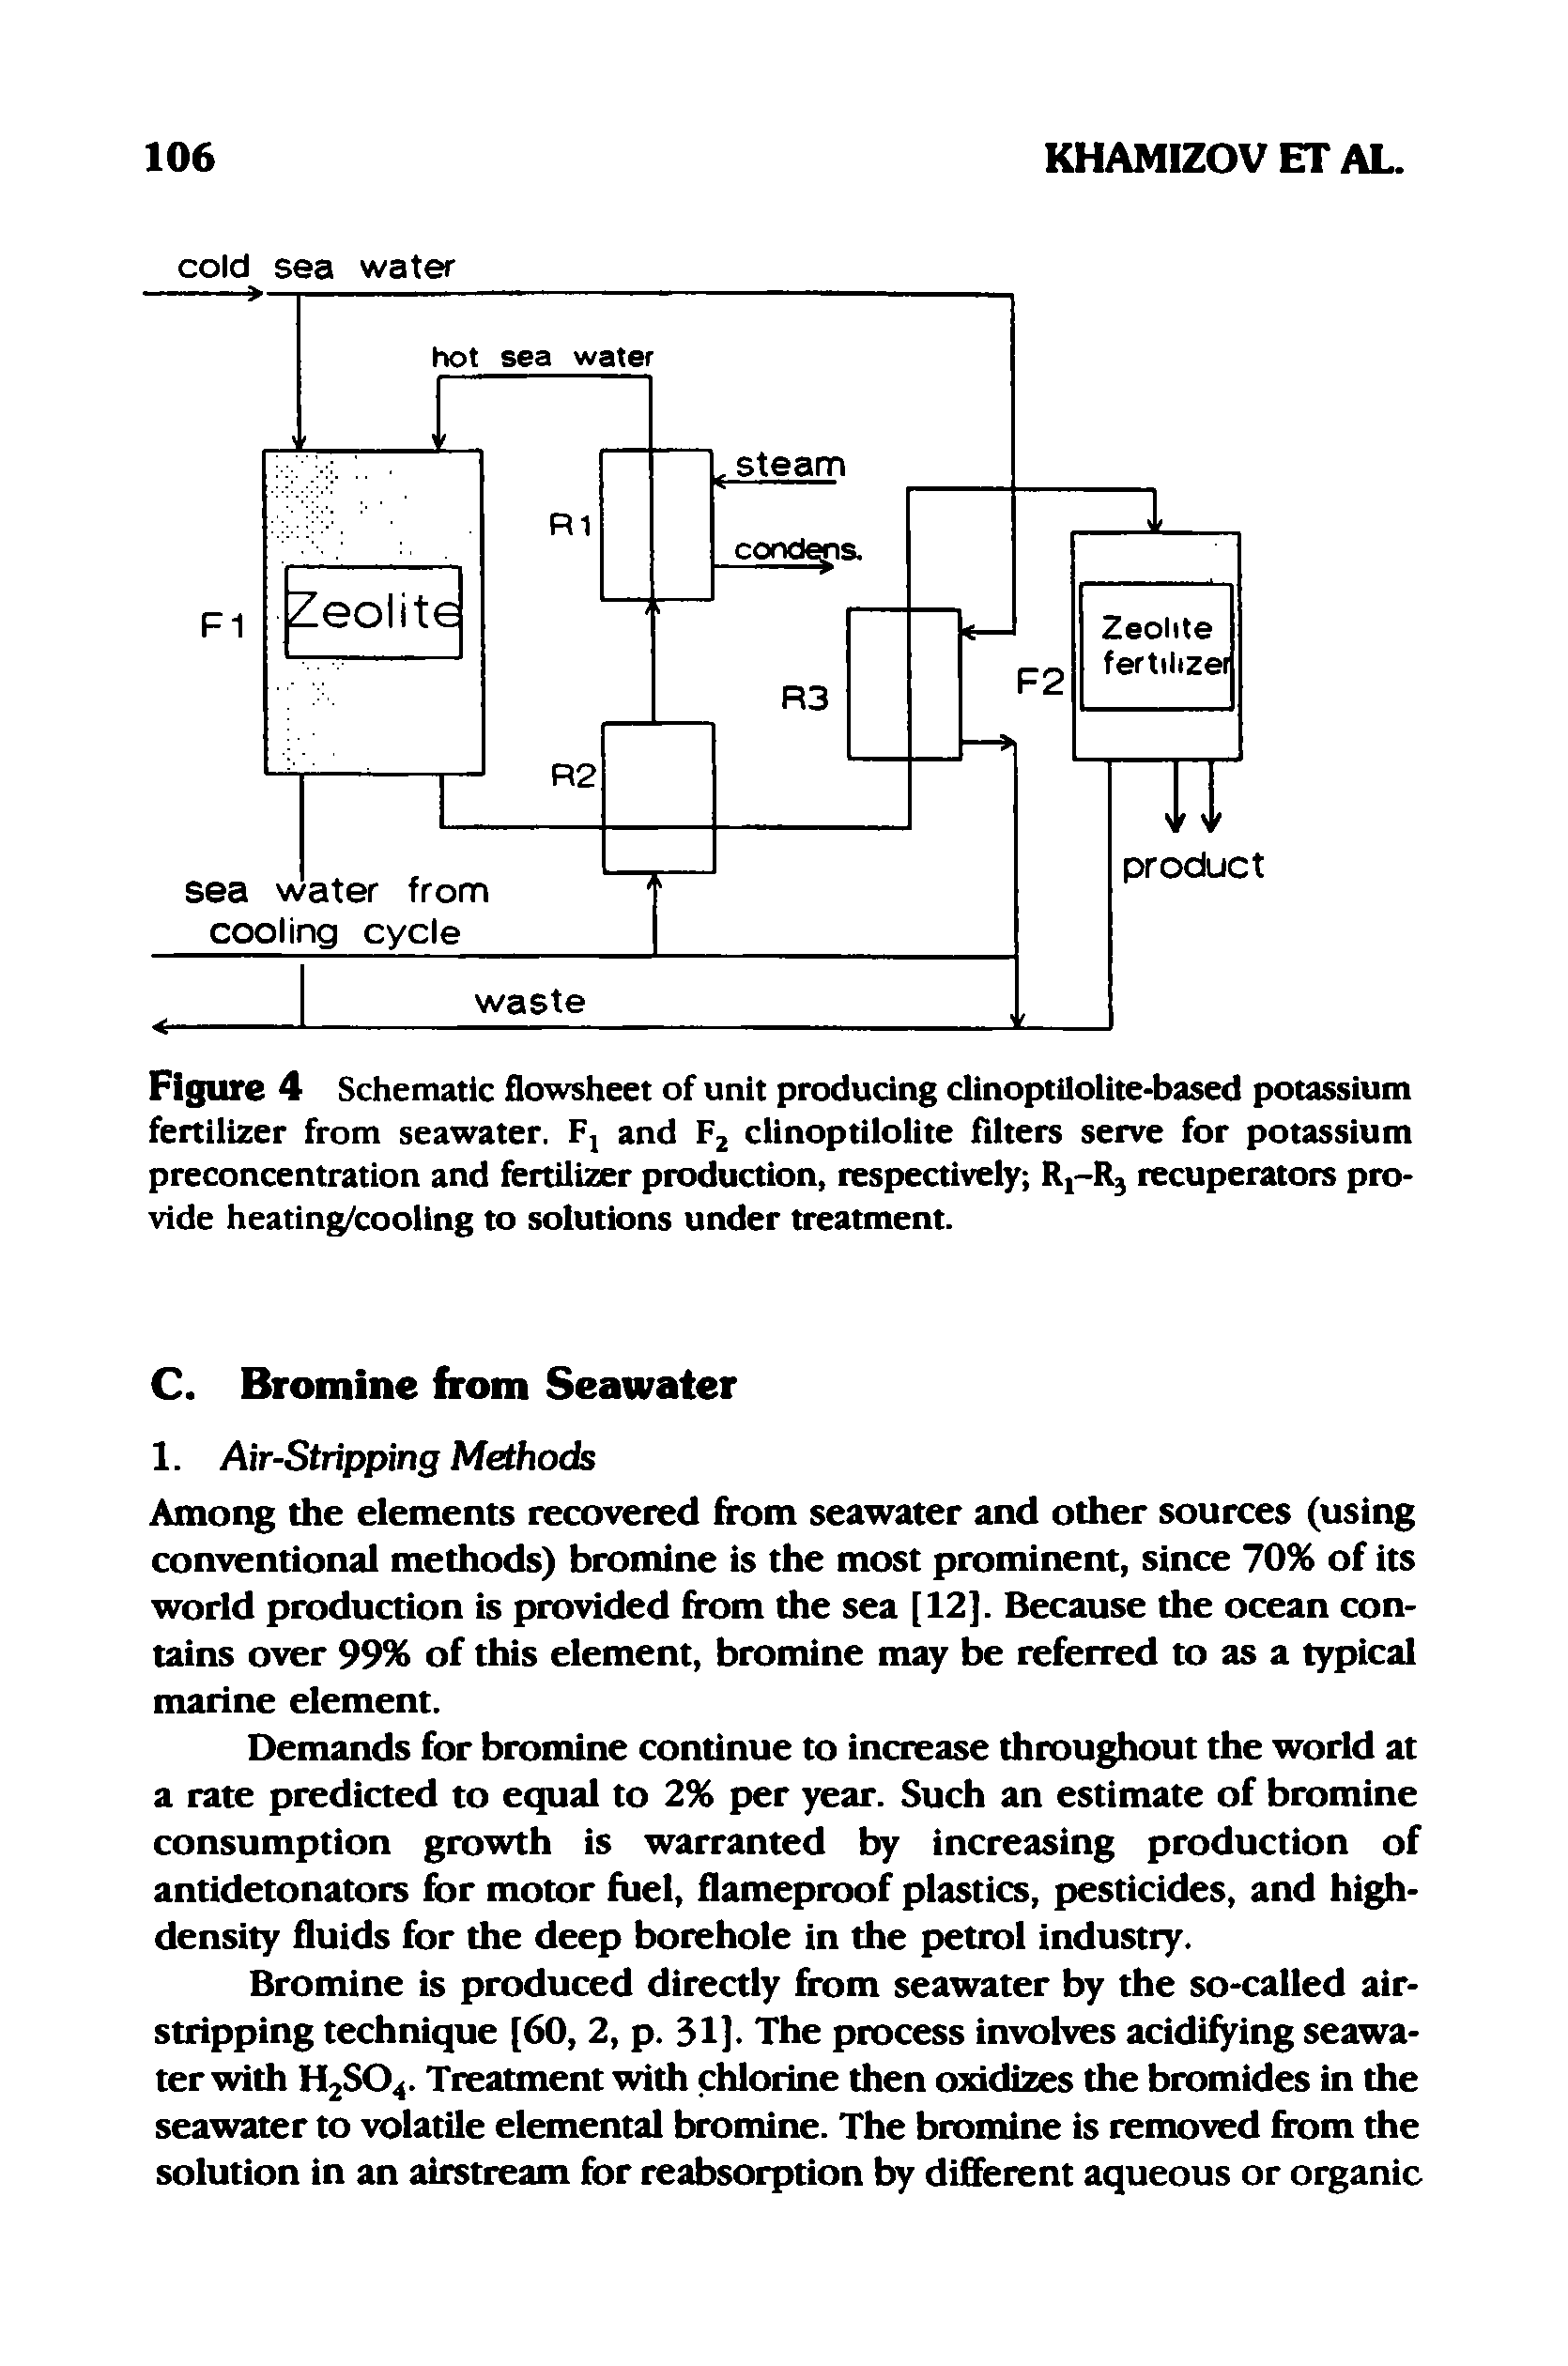 Figure 4 Schematic flowsheet of unit producing dinoptilolite-based potassium fertilizer from seawater. Fj and F2 clinoptilolite filters serve for potassium preconcentration and fertilizer production, respectively R1-R3 recuperators provide heating/cooling to solutions under treatment.